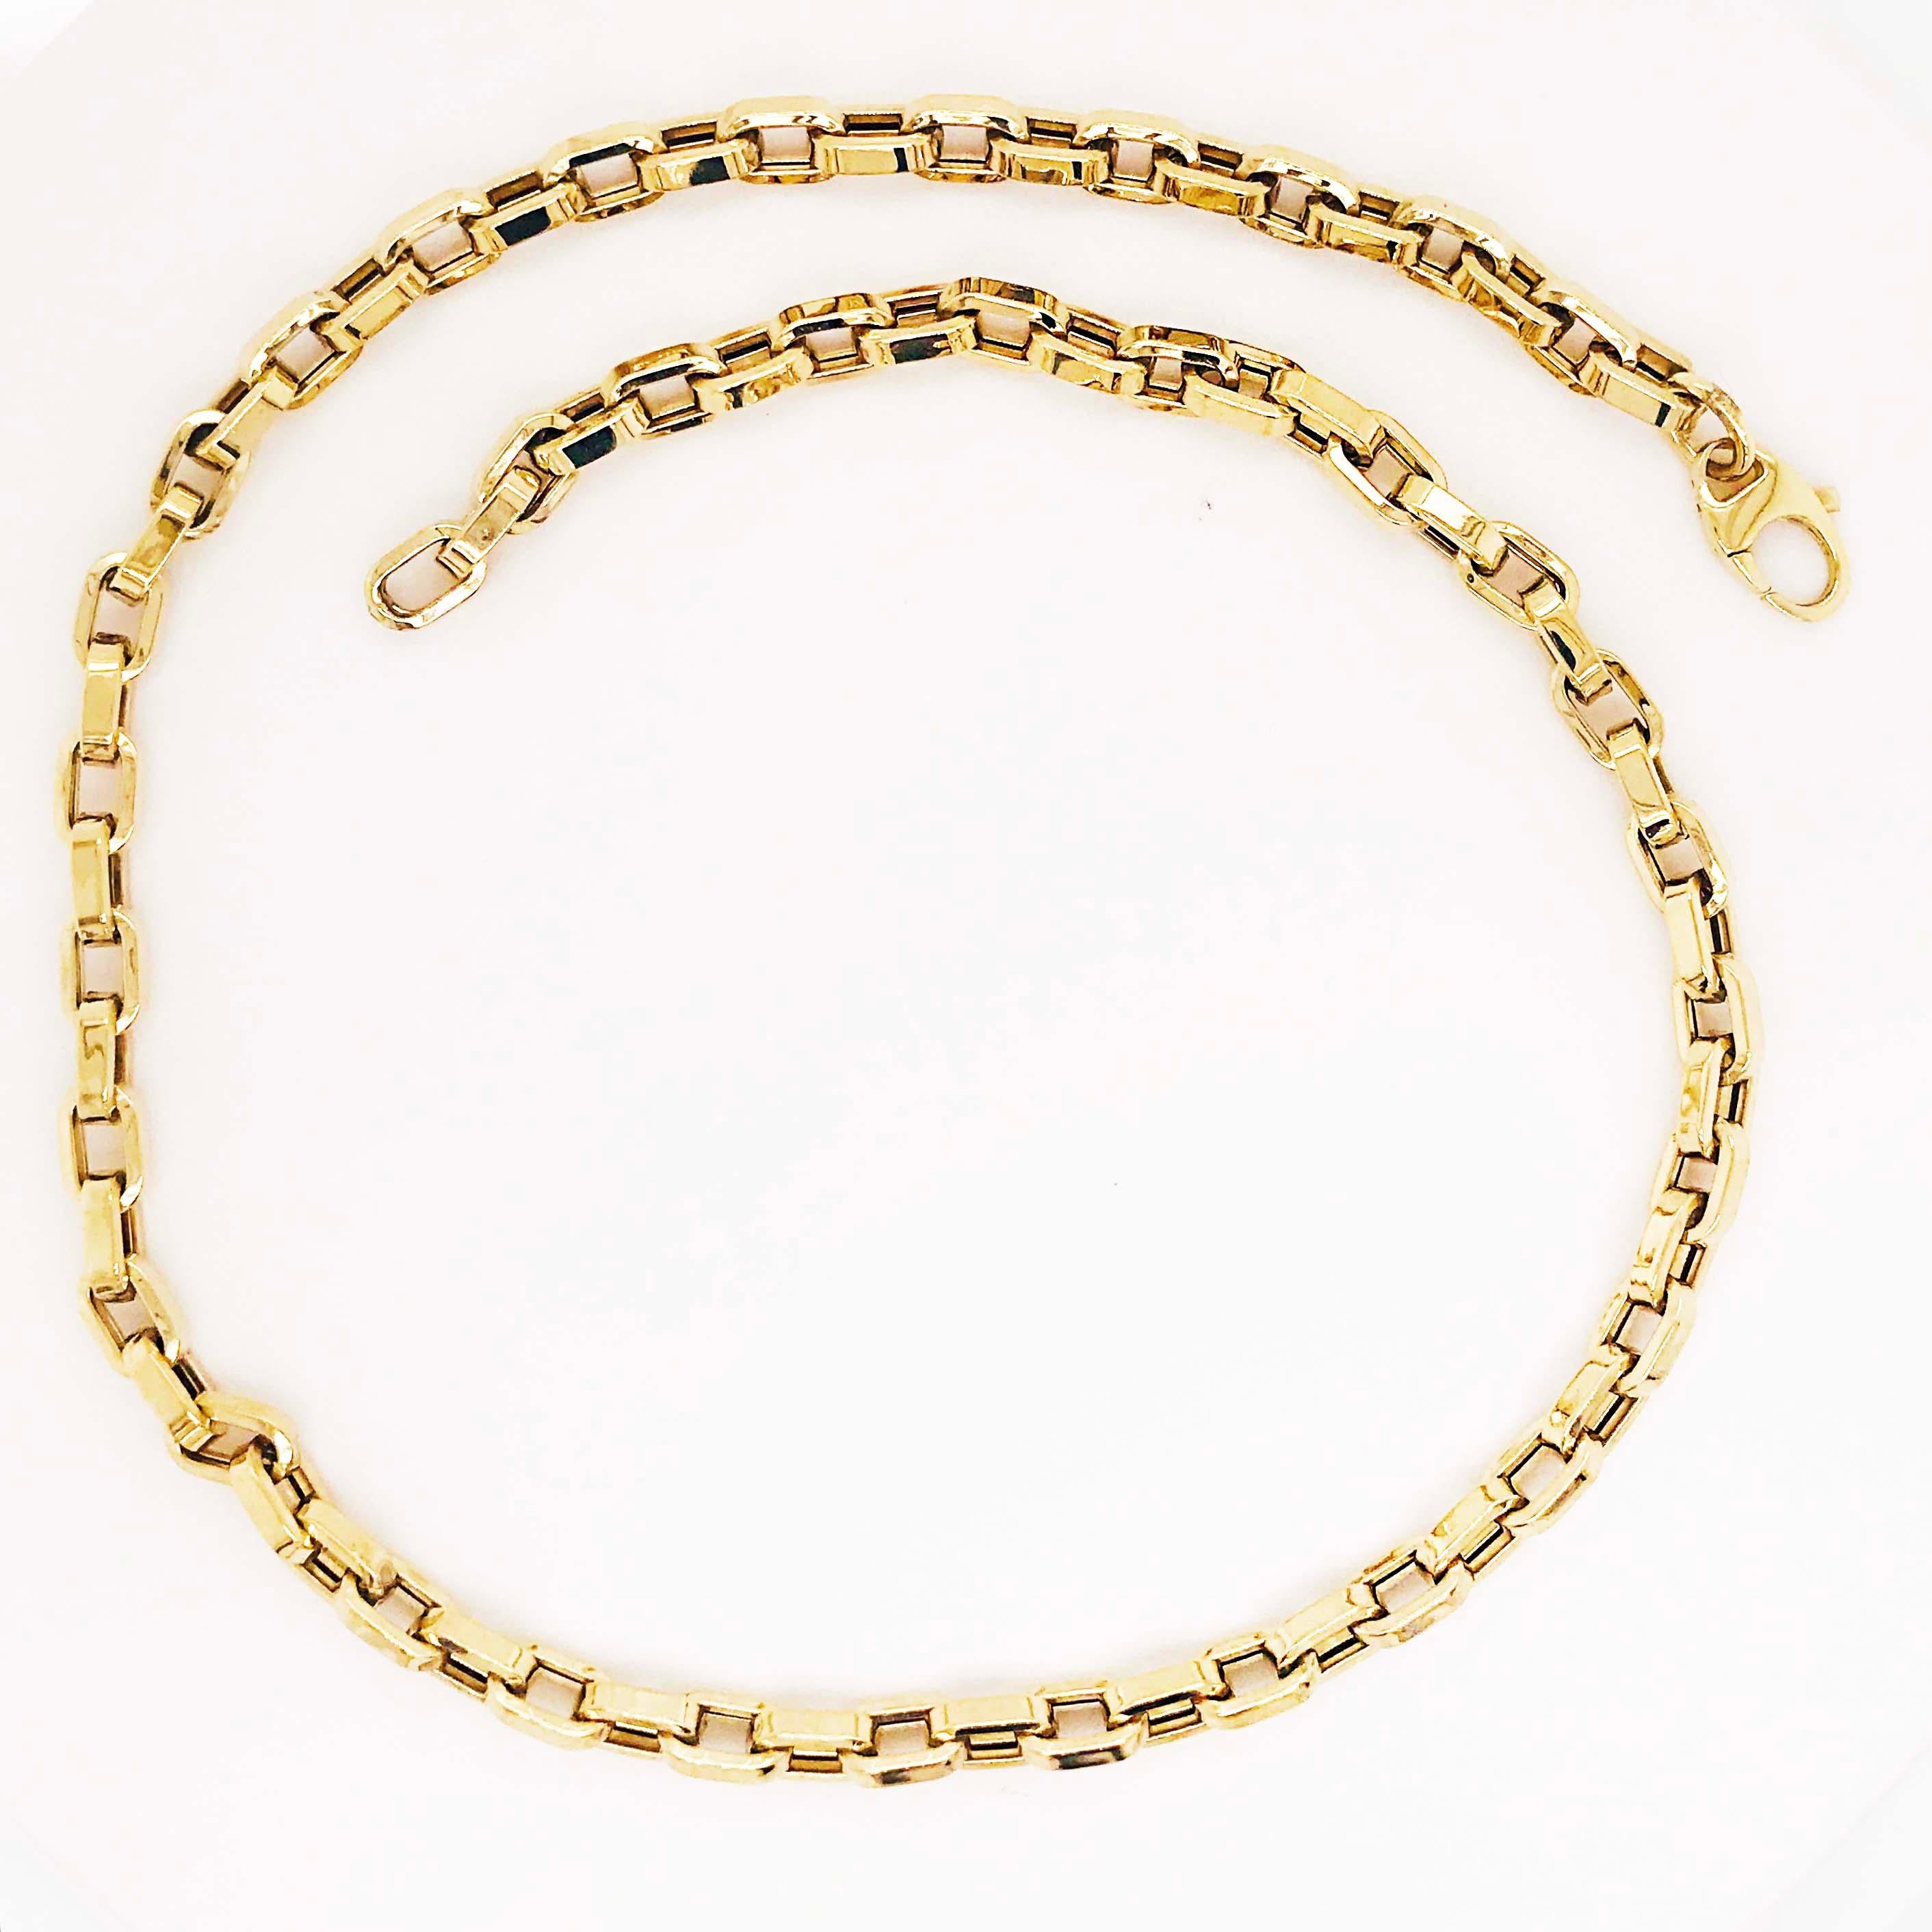 2020 FASHION JEWELRY - the latest fine jewelry fad! 
This gorgeous, fashionable paperclip-like large link chain is a handmade chunky link chain necklace. With each link handmade in 14k yellow gold. The links are squared ovals and measure 4.75mm wide